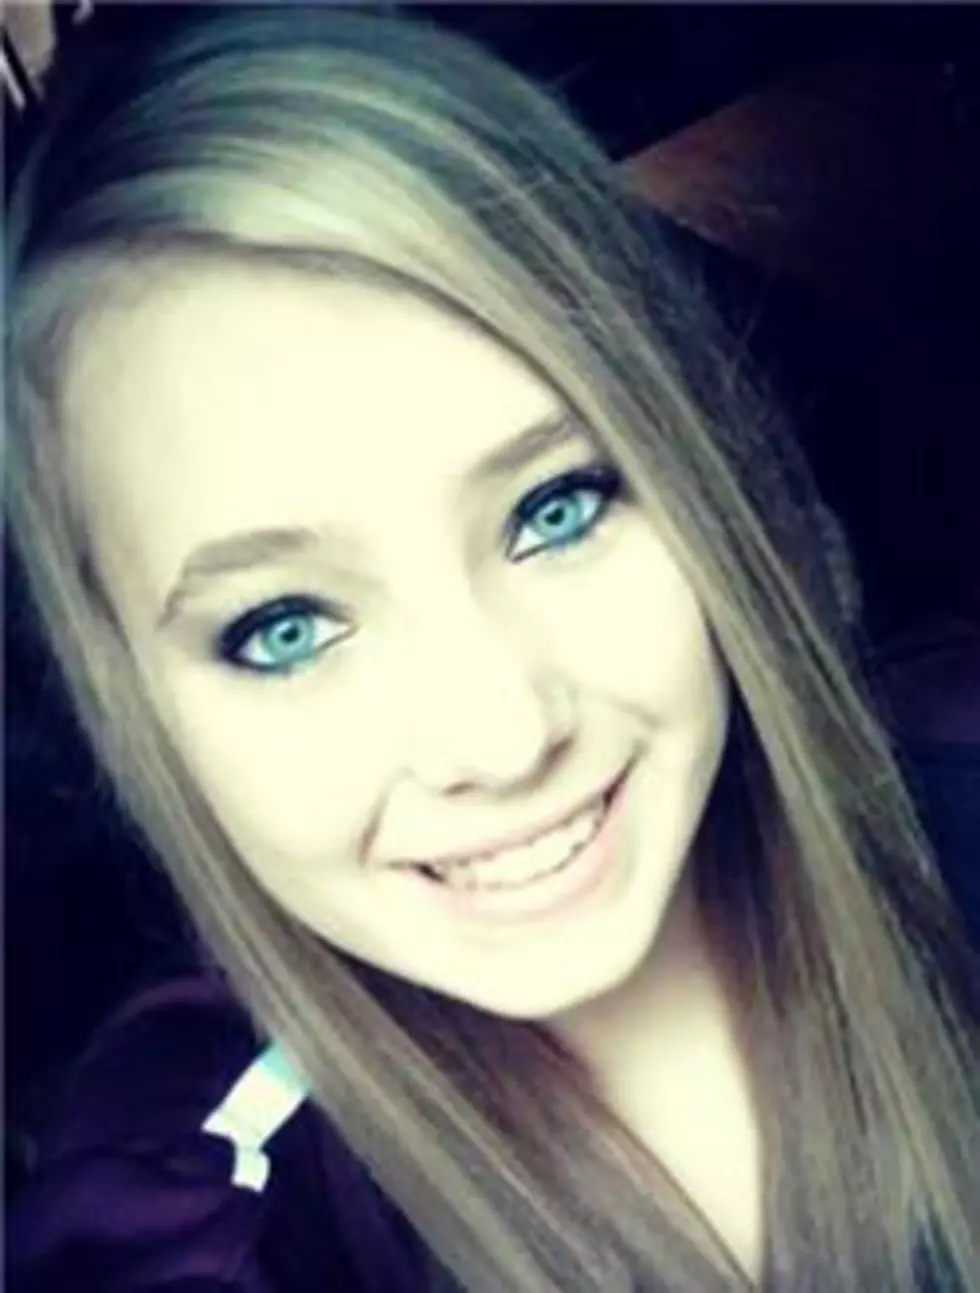 Police: Missing 15-Year-Old Makyla Standish May Be Headed to Binghamton